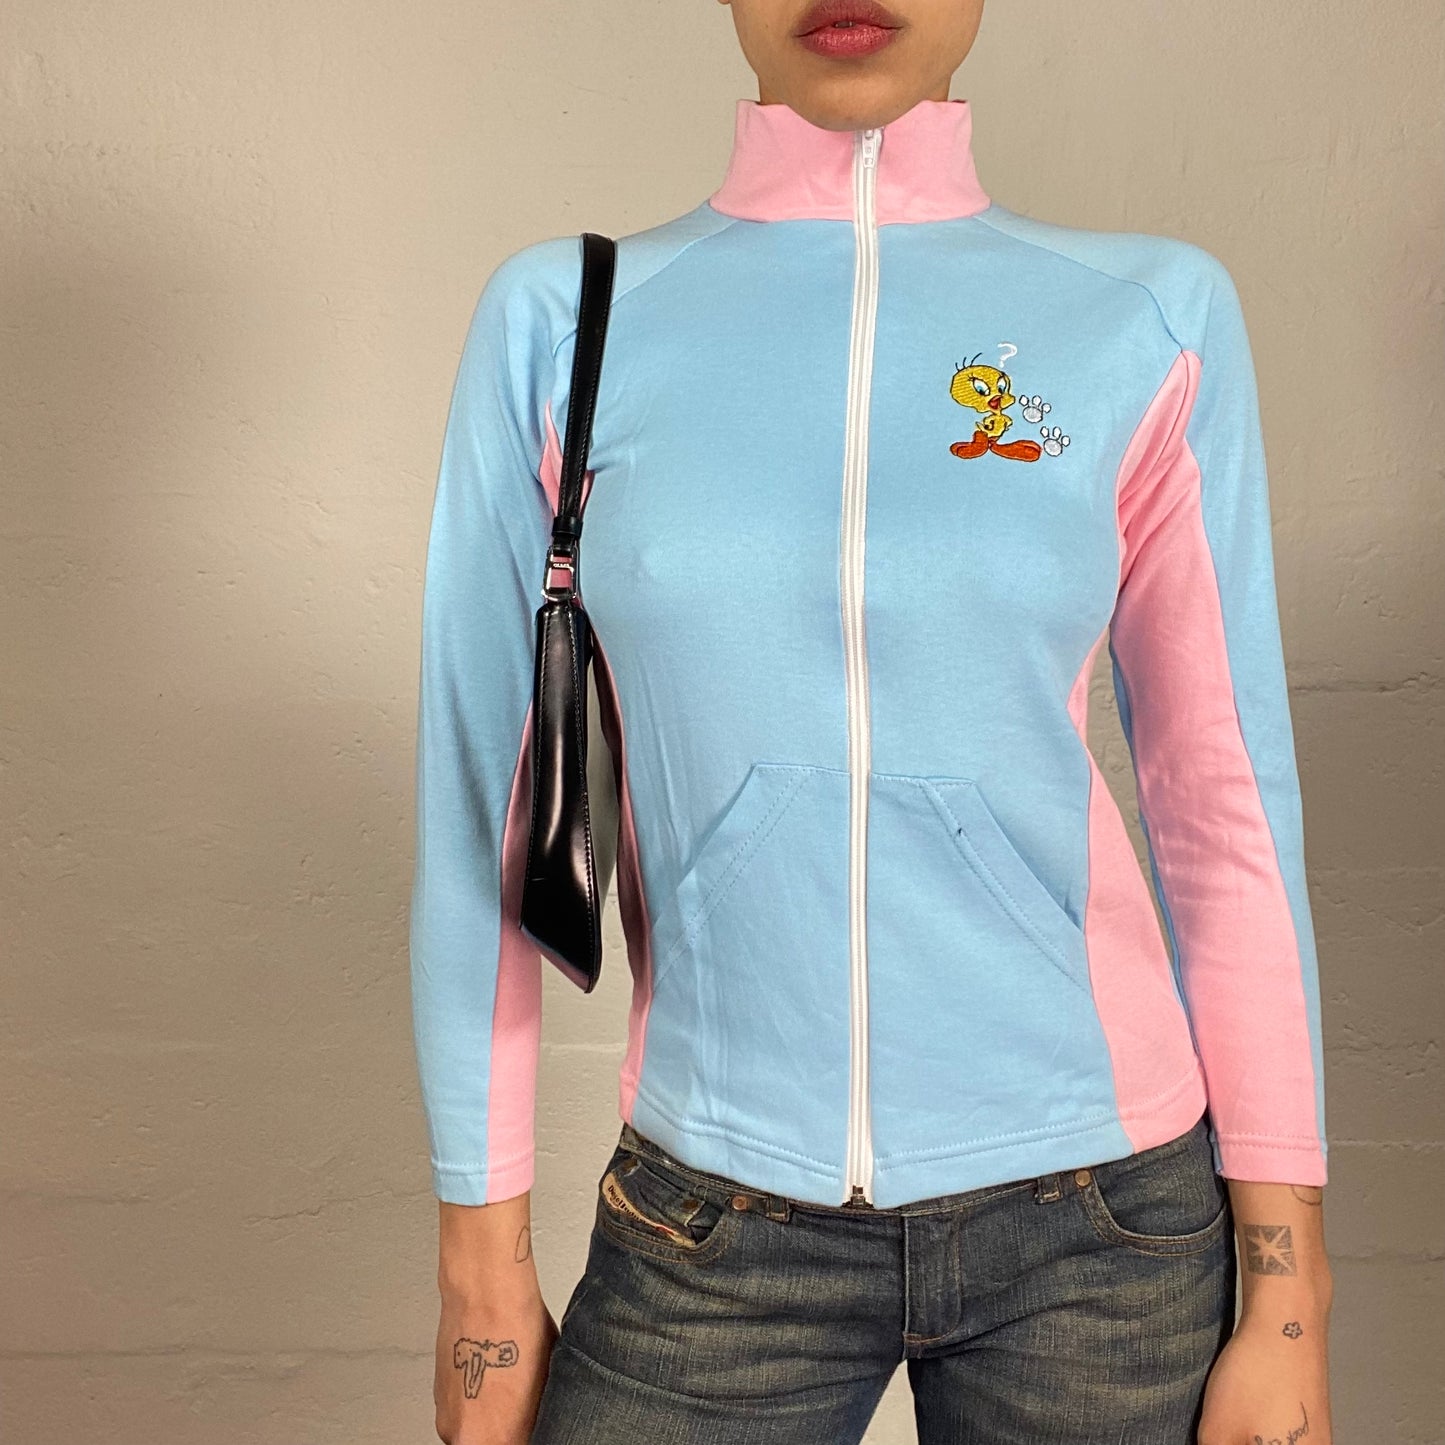 Vintage 2000's Candy Style Baby Blue and Pink Zip Up Pullover with Cartoon Embroidery Print (S)